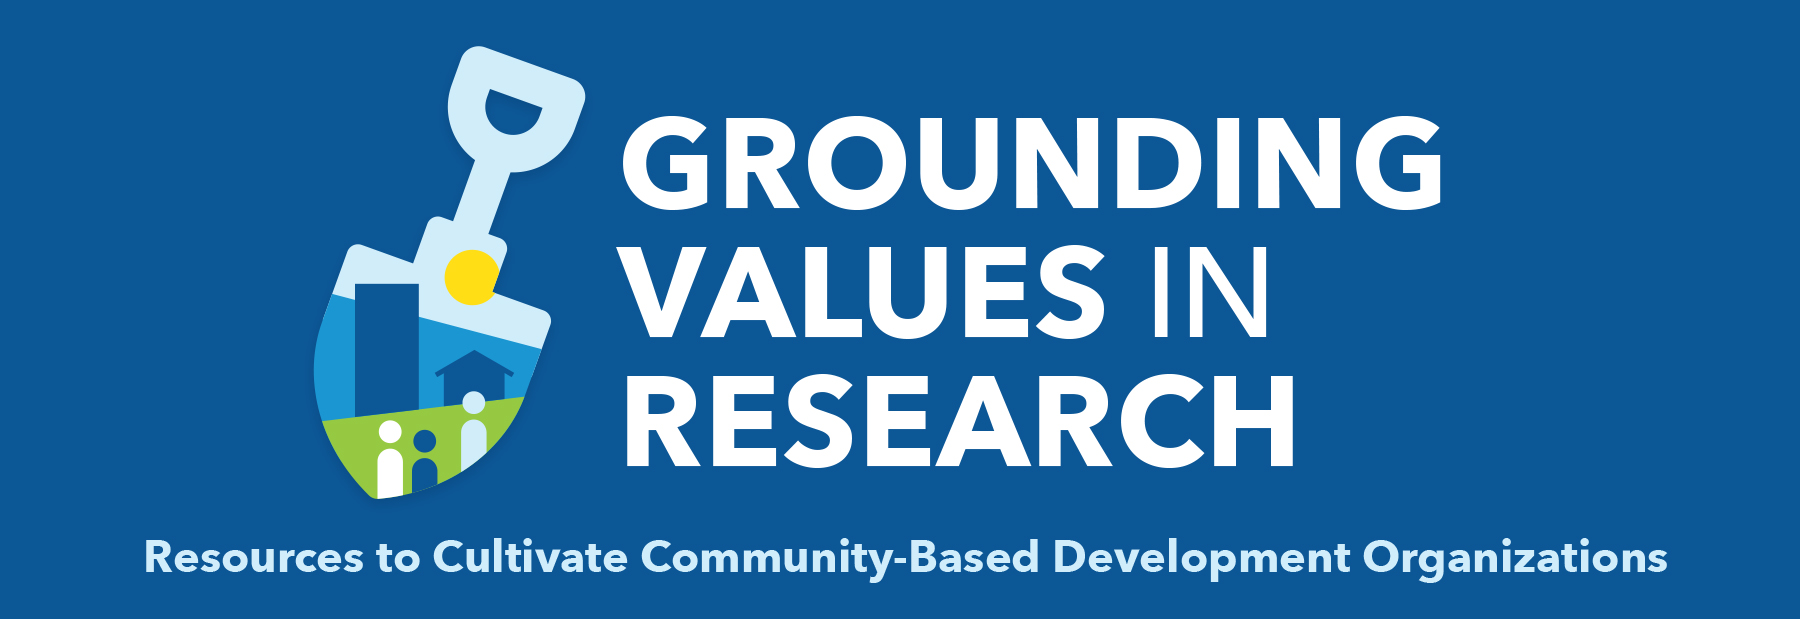 Grounding Values in Research